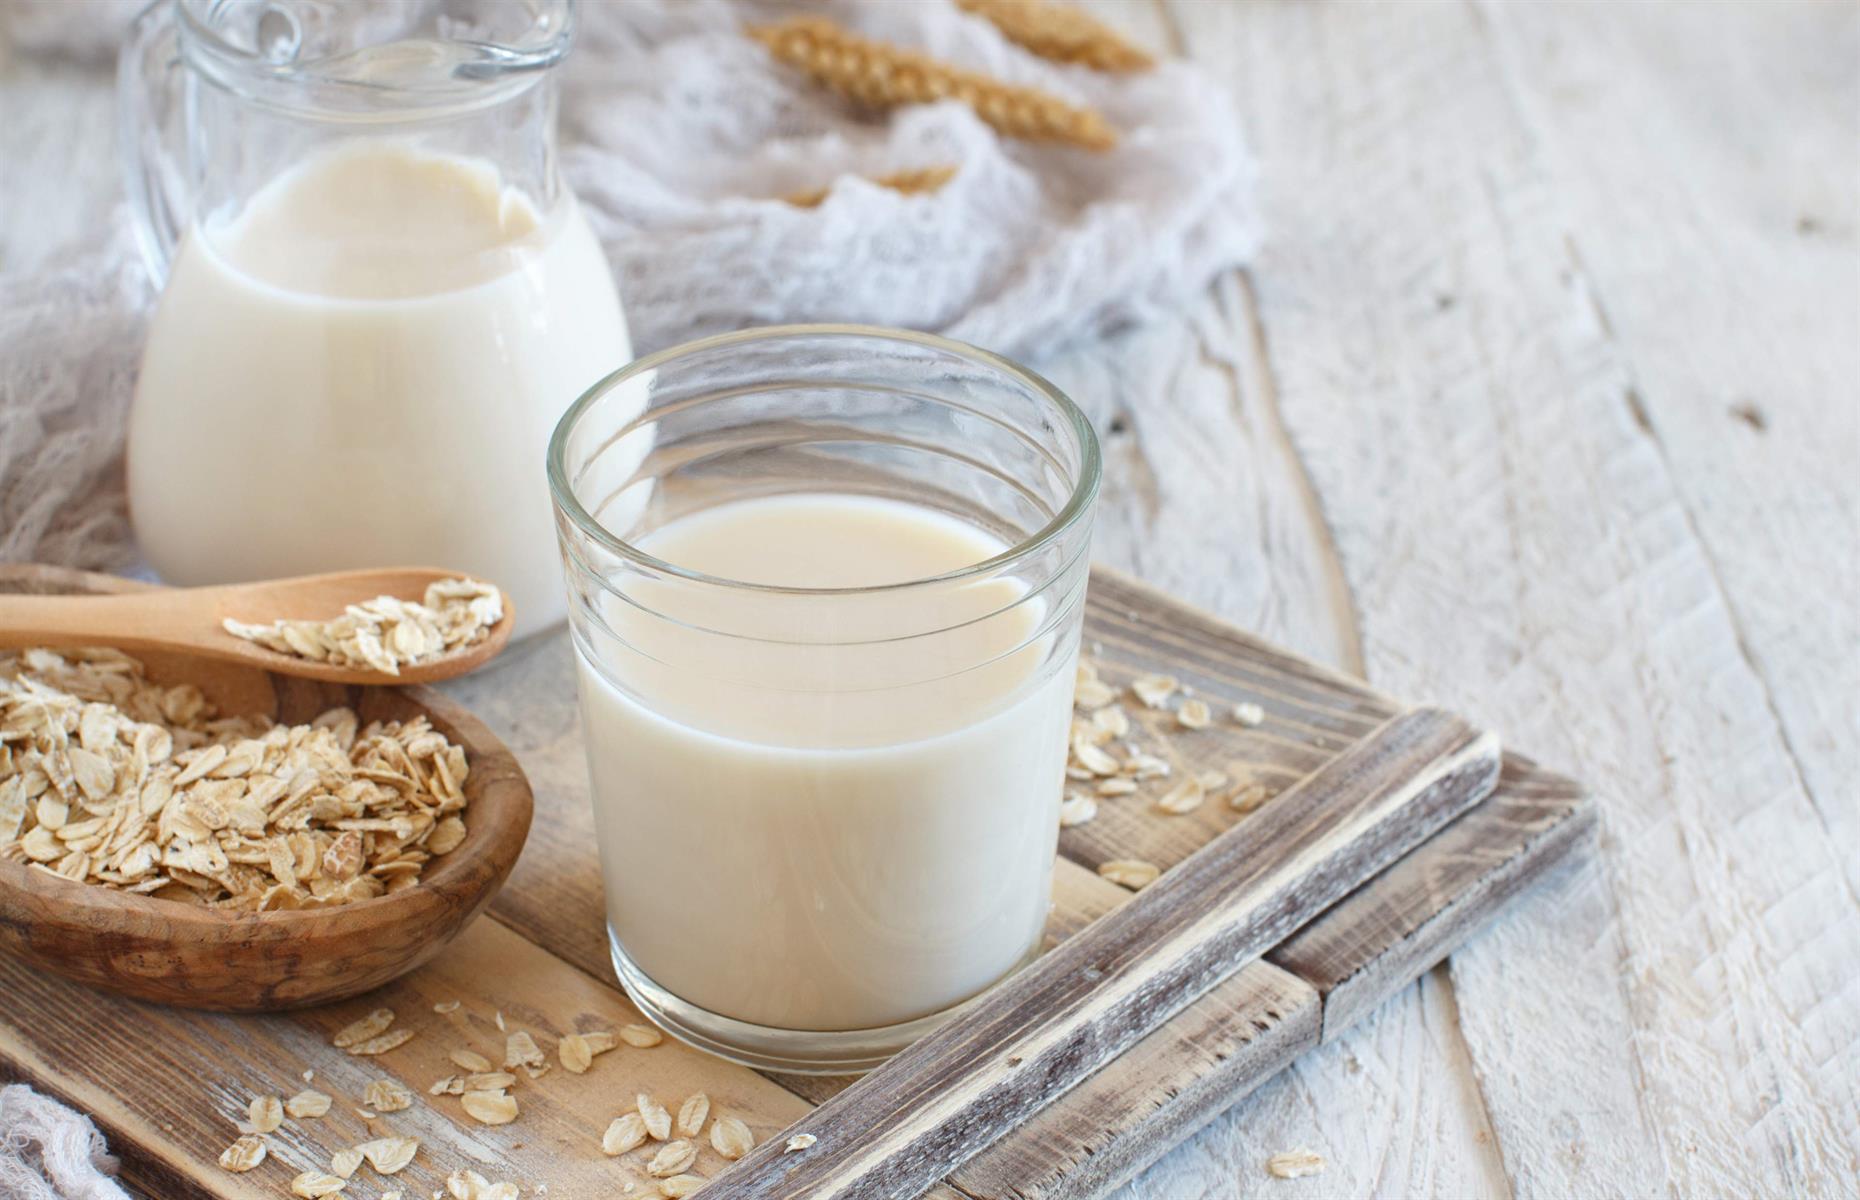 The truth about plant-based milks